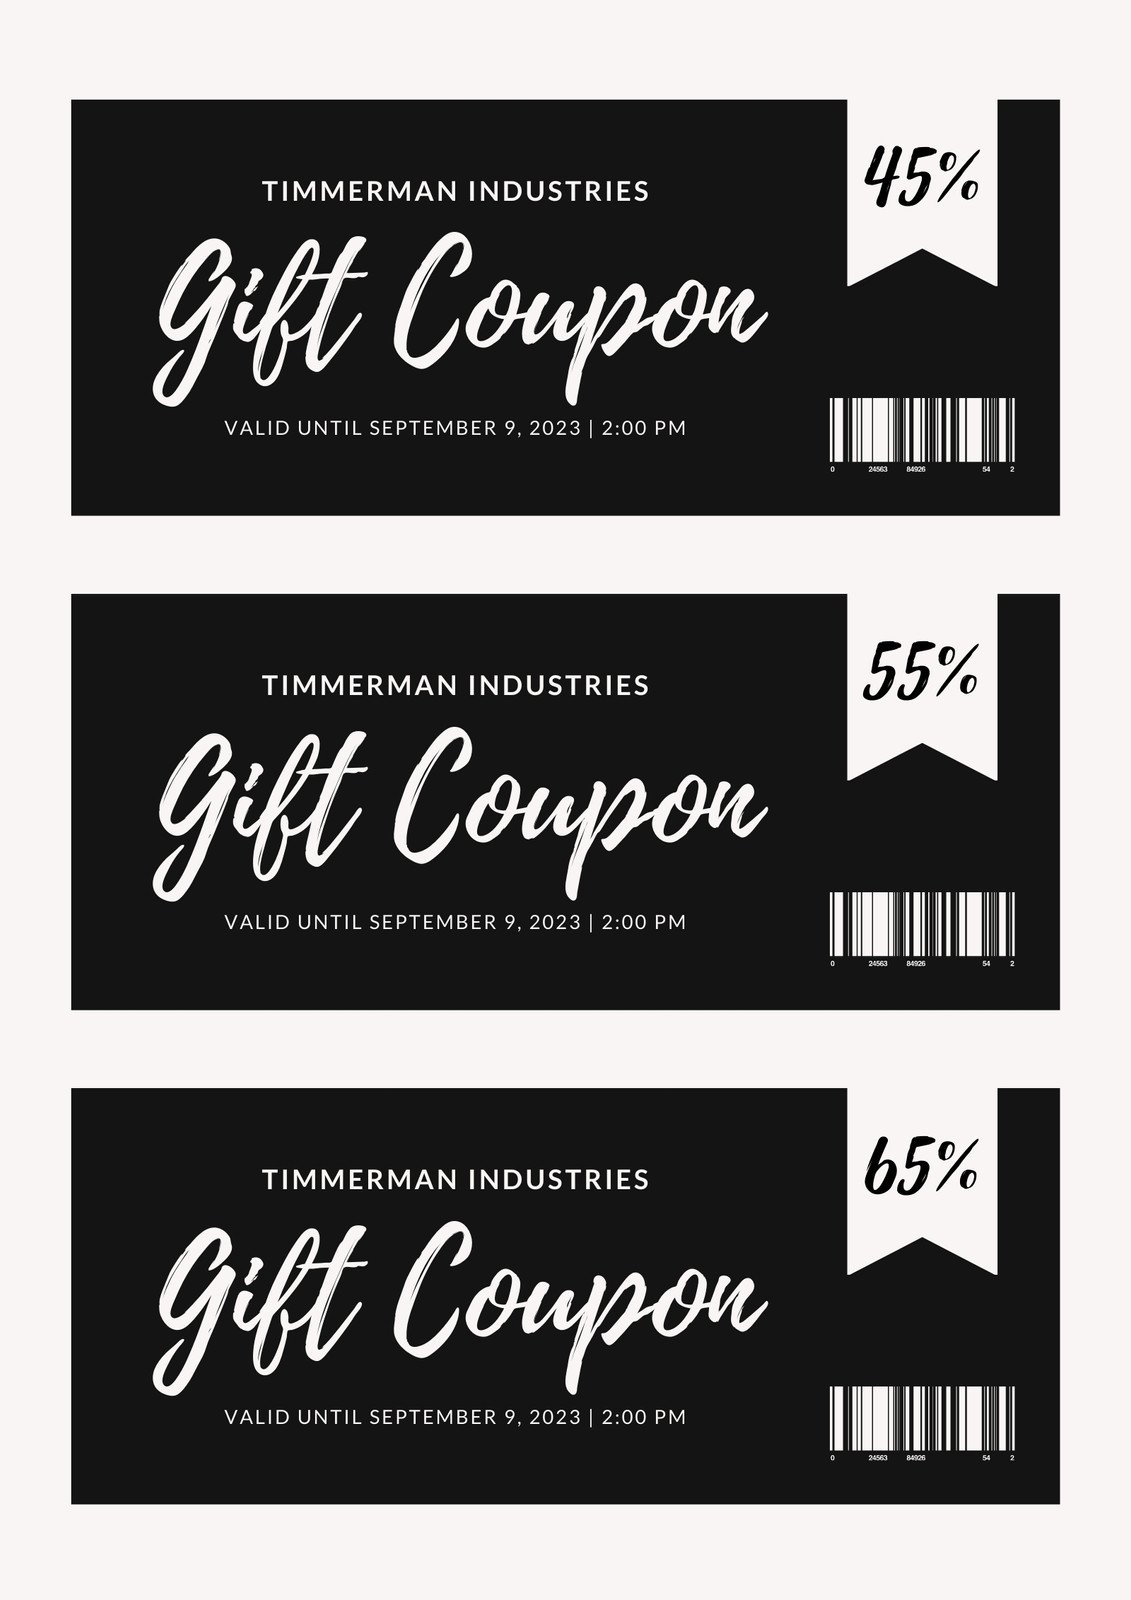 New Year Gift Voucher Banner Coupon Design | AI Free Download - Pikbest